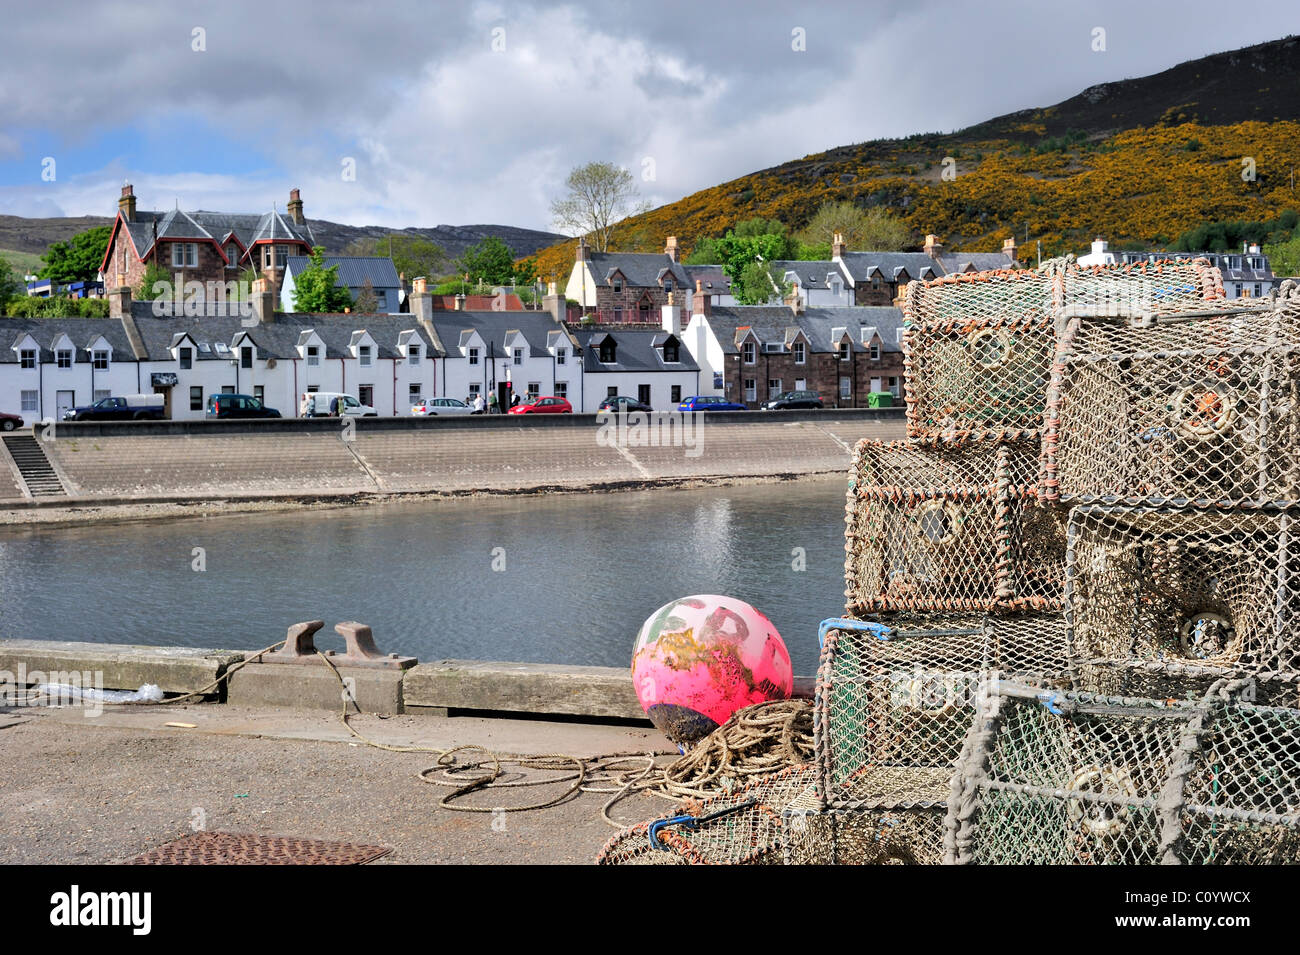 Stacked lobster creels / traps in the Ullapool harbour, Highlands, Scotland, UK Stock Photo